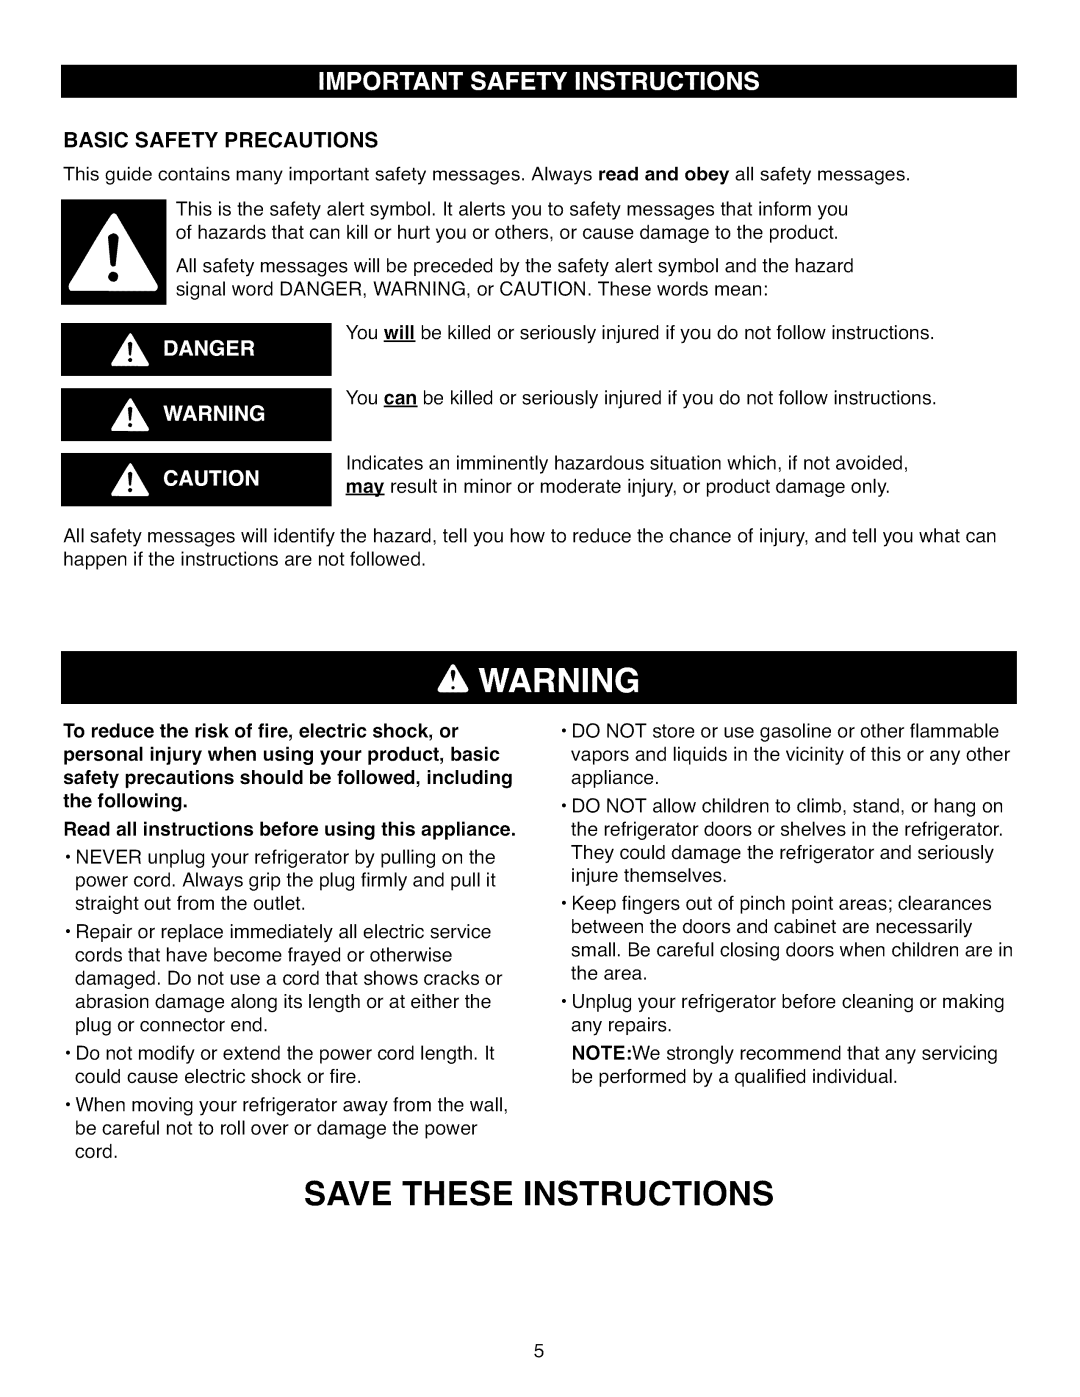 Kenmore 795.7105 manual Save These Instructions 